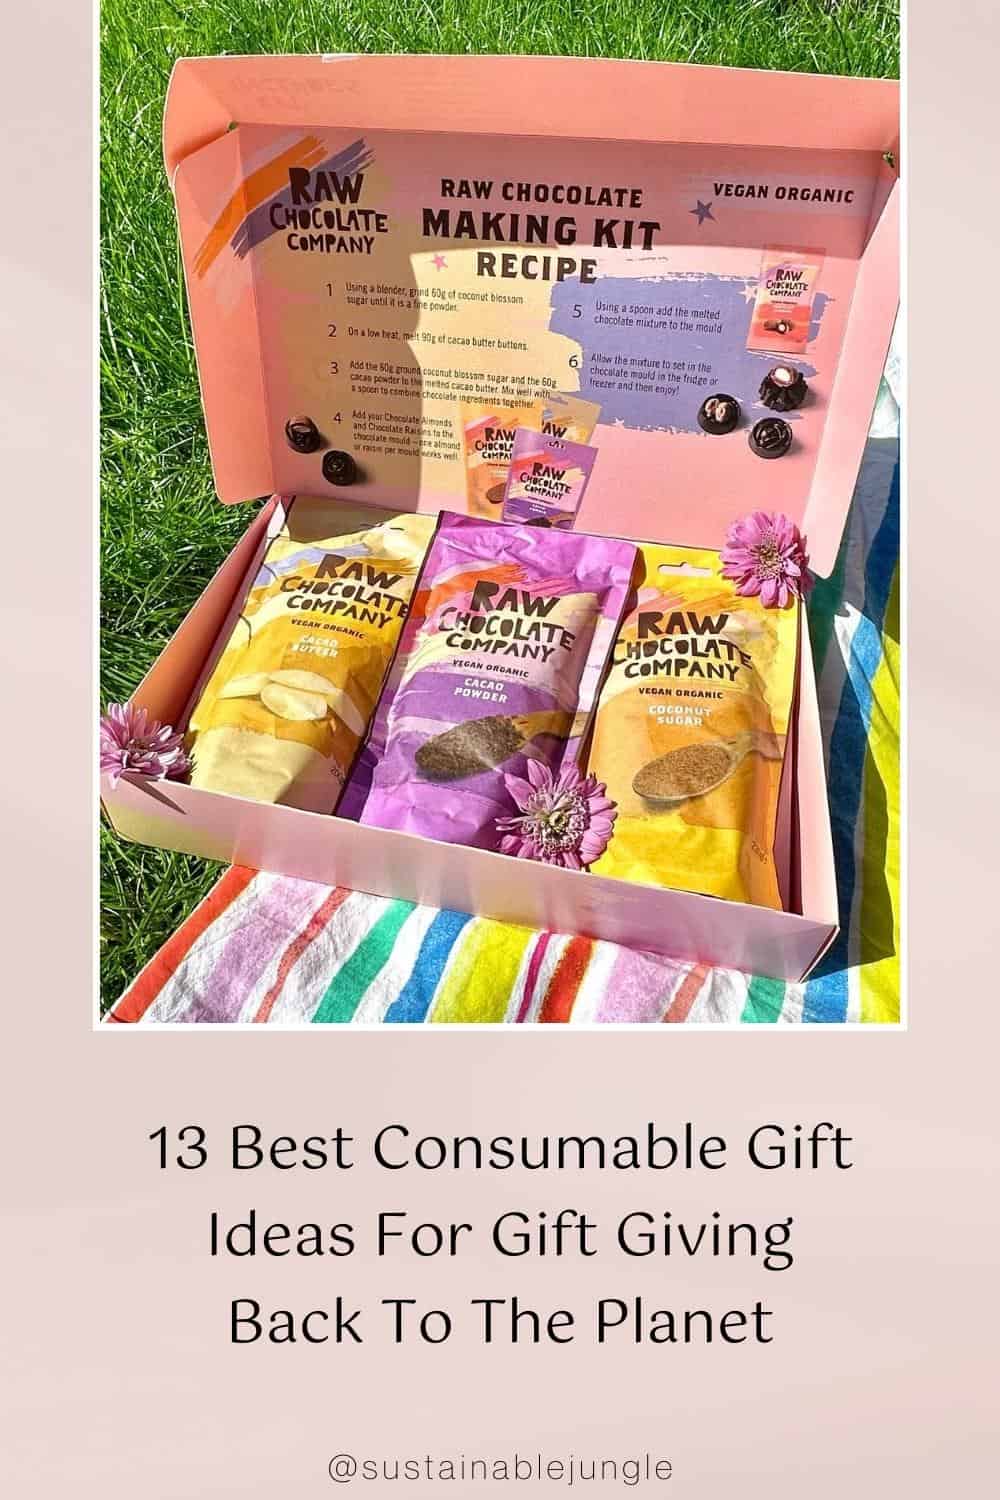 13 Best Consumable Gift Ideas For Gift Giving Back To The Planet Image by Raw Chocolate Company #consumablegifts #bestconsumablegifts #consumablegiftideas #consumablechristmasgifts #consumabelgiftideasforadults #sustainablejungle